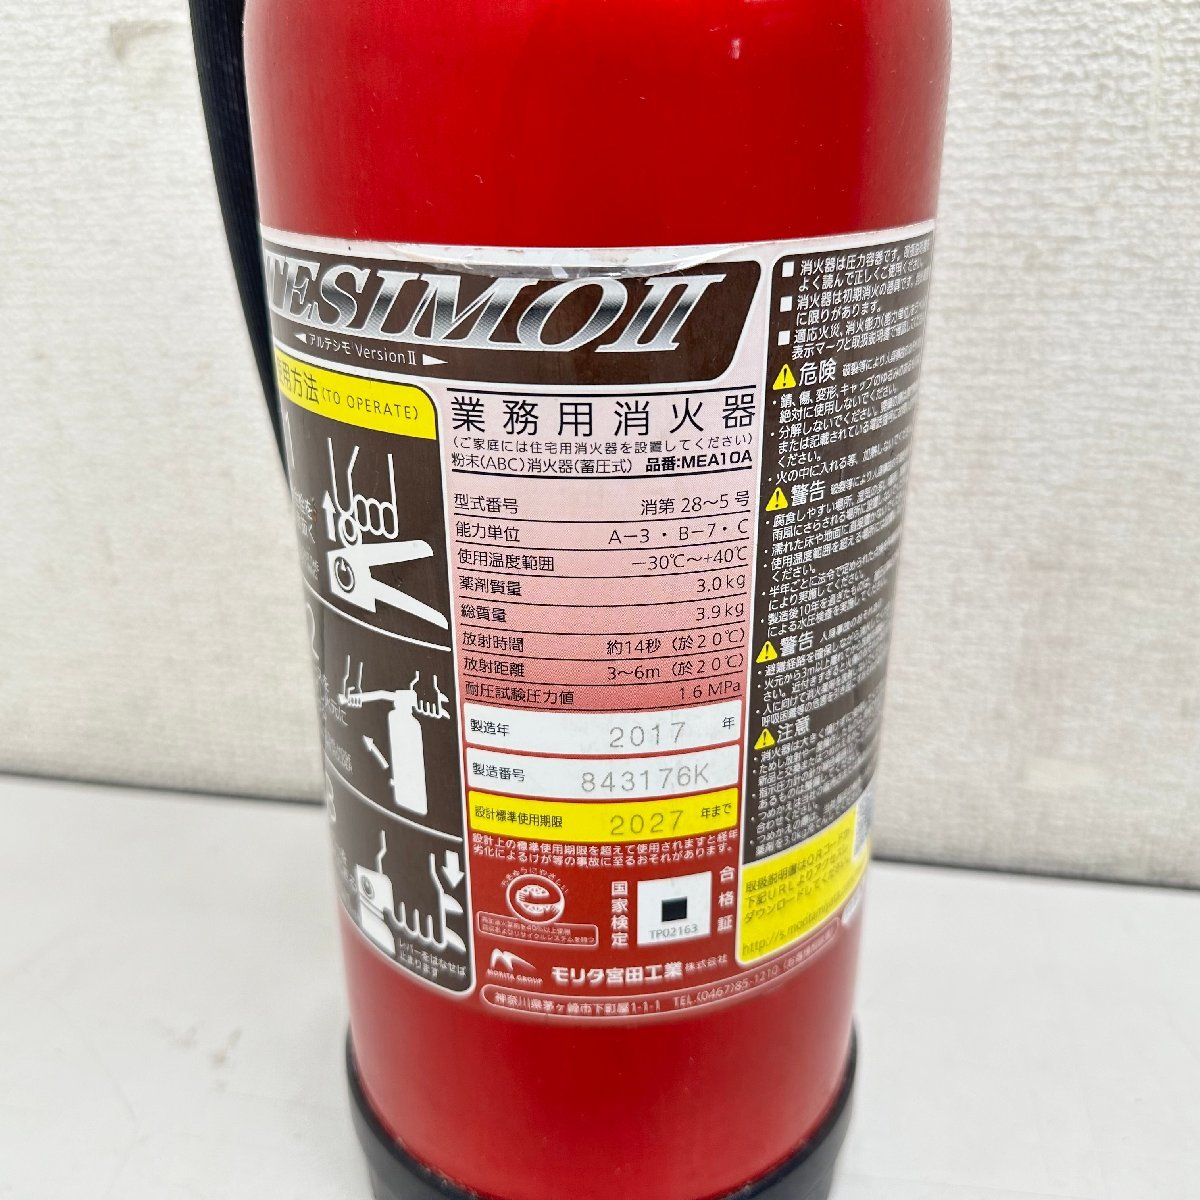 #*[2] Morita . rice field industry ALTESIMOⅡ arte simoⅡ business use fire extinguisher use time limit 2027 year 6/012202a*#